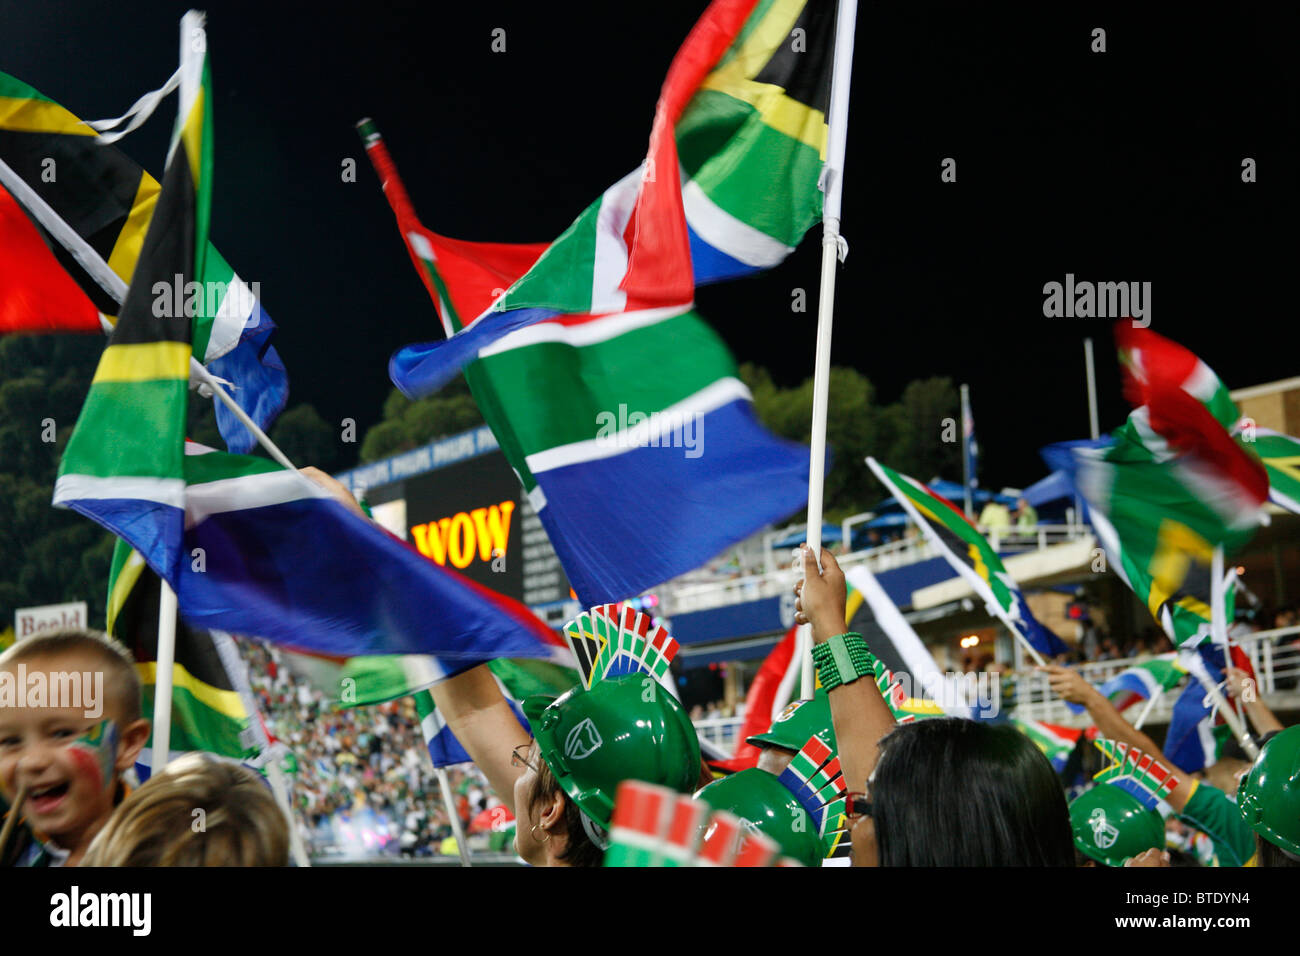 Cricket fans waving South African flags at a Pro20 international cricket match Stock Photo